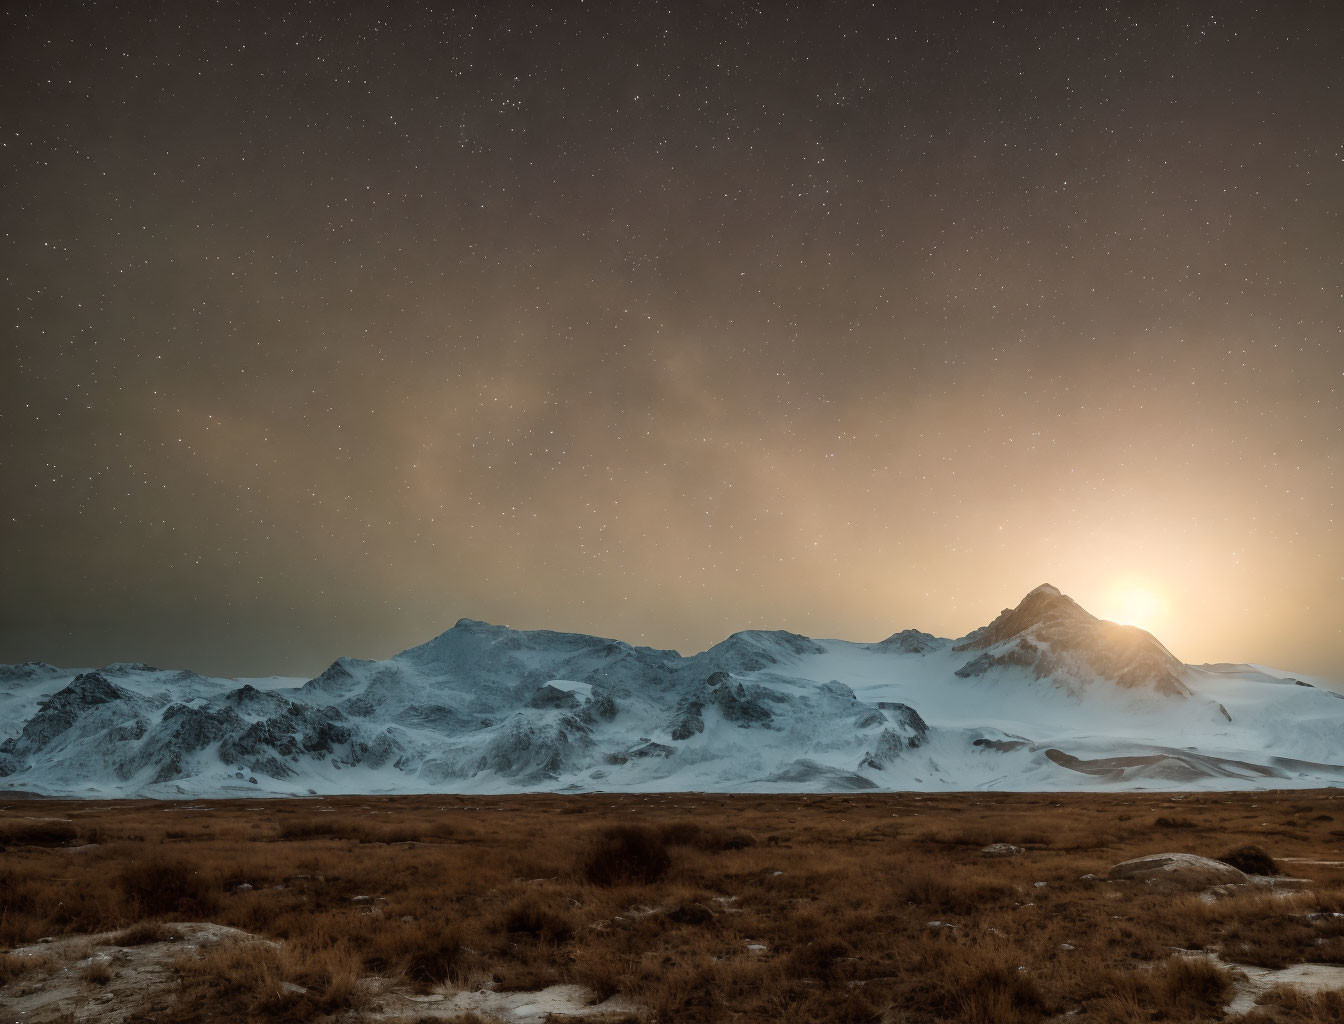 Snowy Mountain Range Sunset with Starry Sky and Barren Foreground